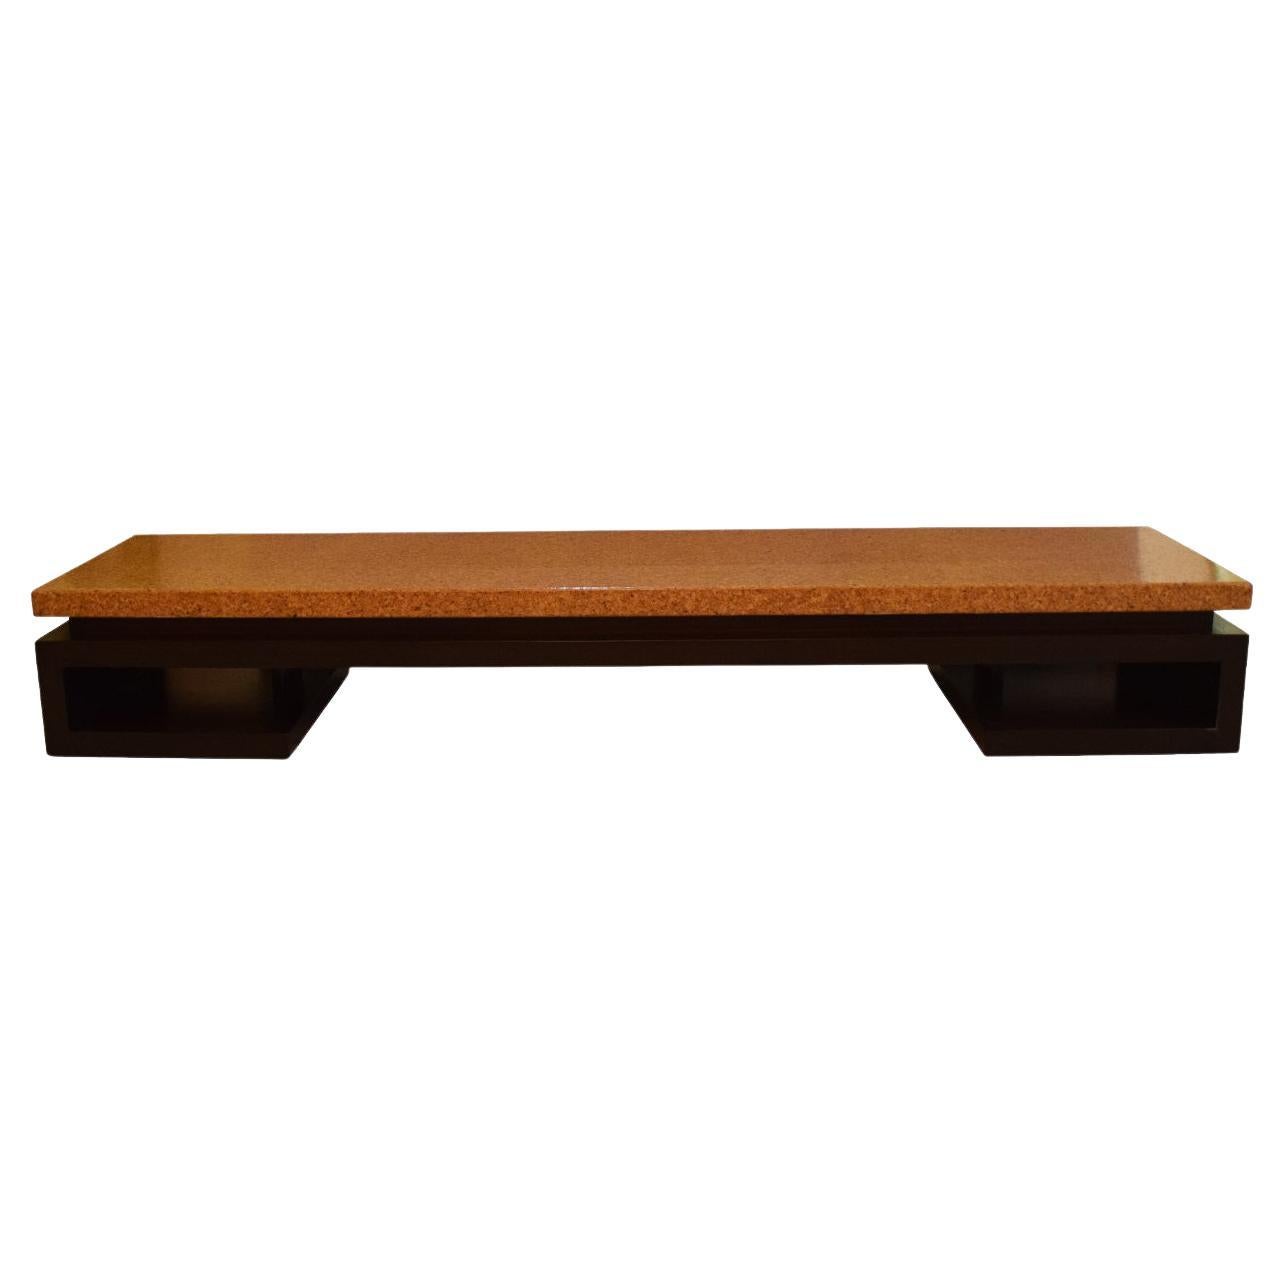 Paul Frankl Low Cork Table/Bench 1940’s Fot Johnson Furniture Co. For Sale